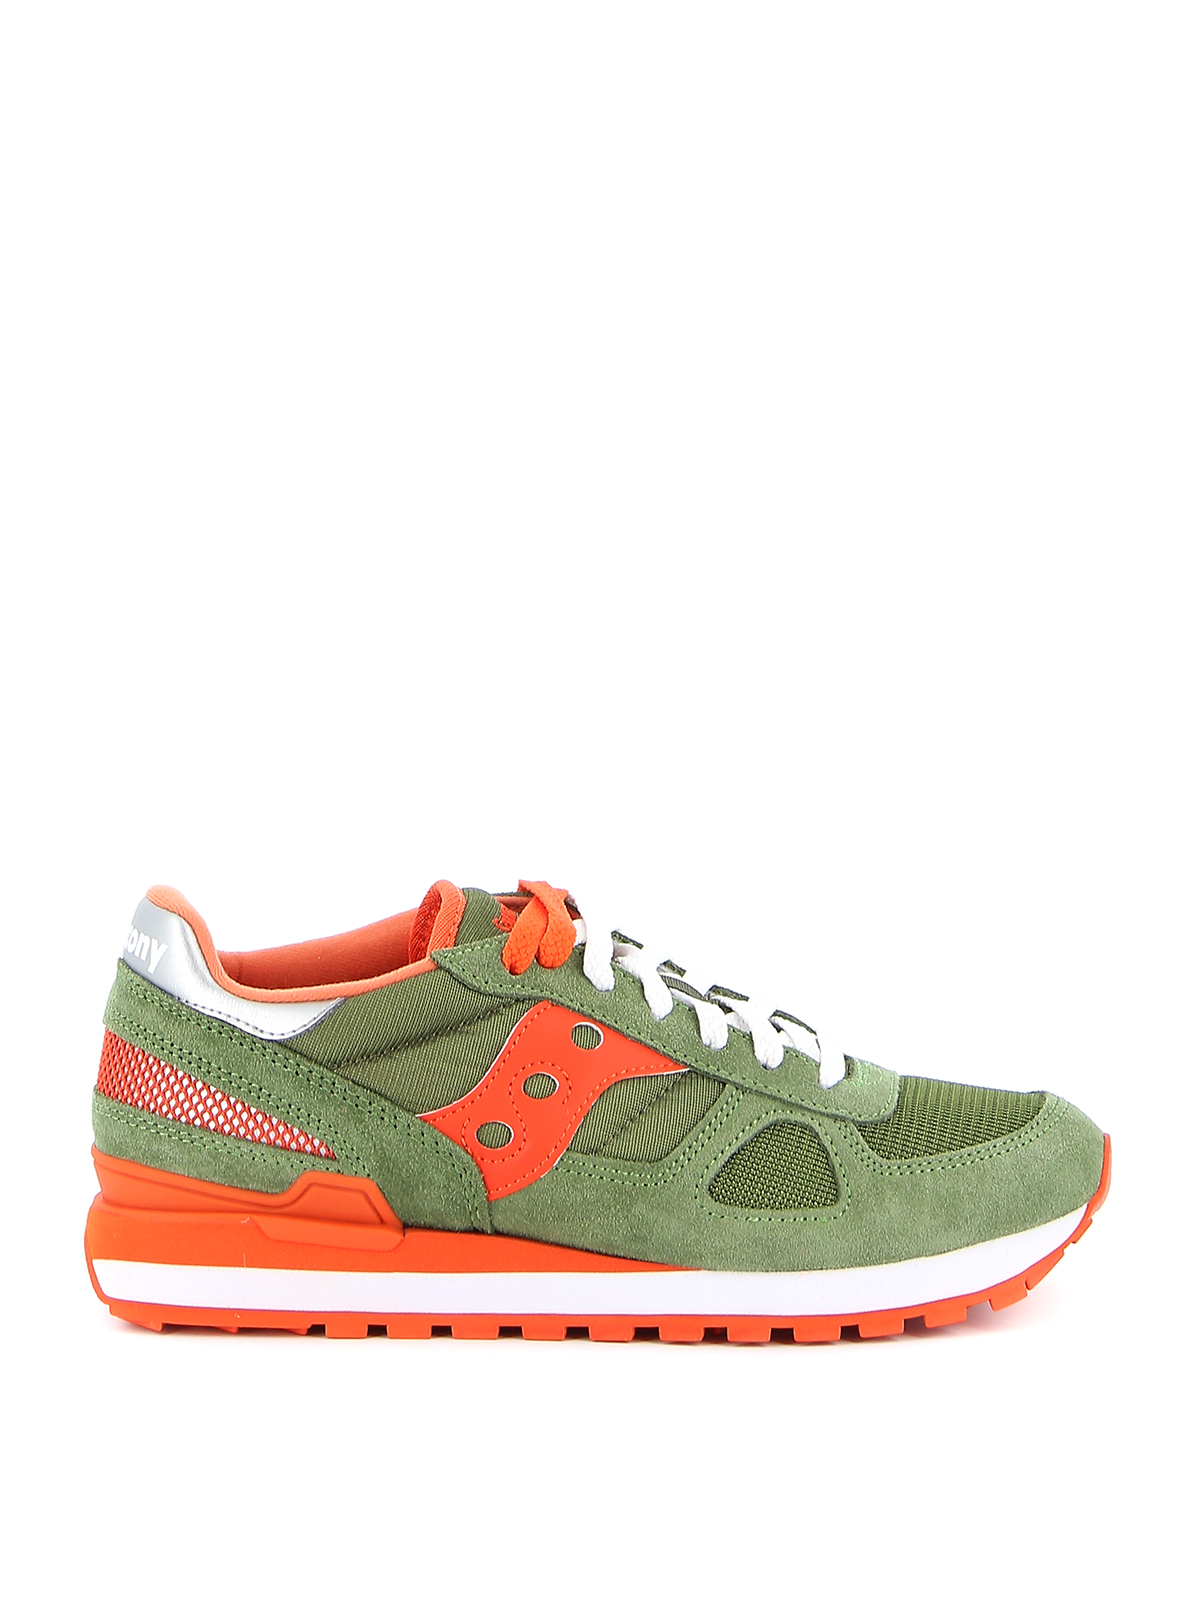 green saucony shoes